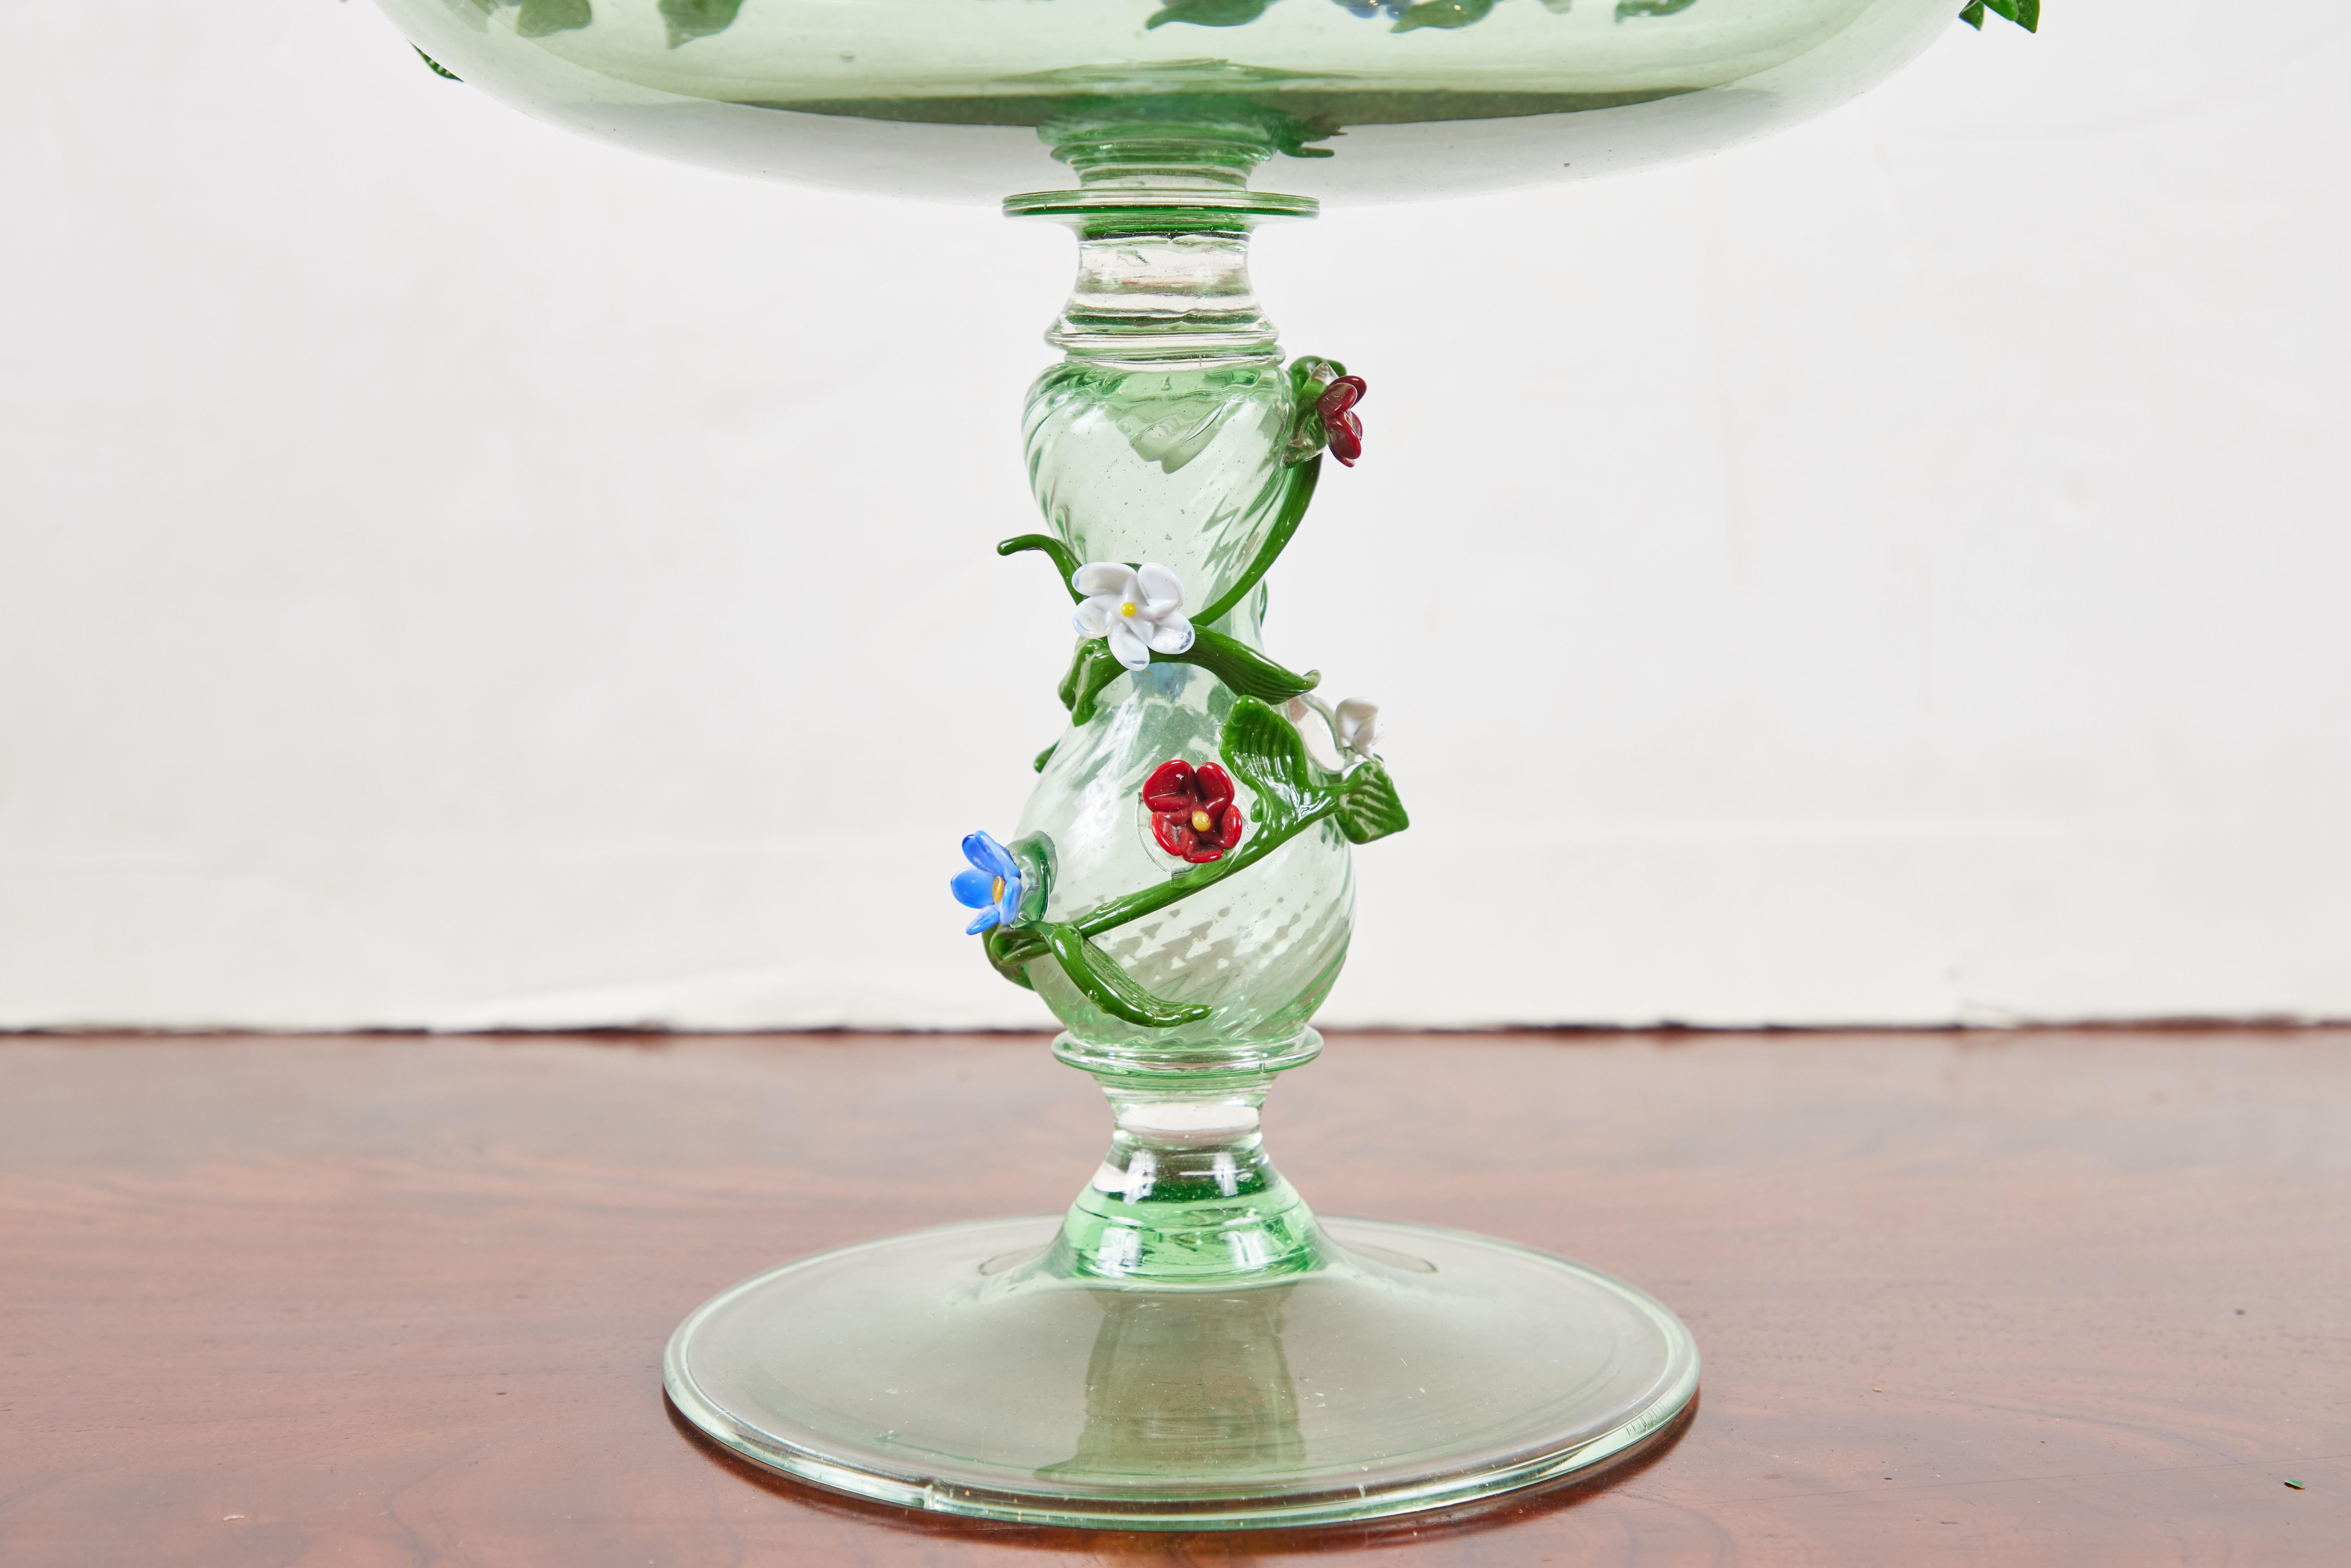 Appliqué Floral Embellished, Italian Glass Tazza For Sale